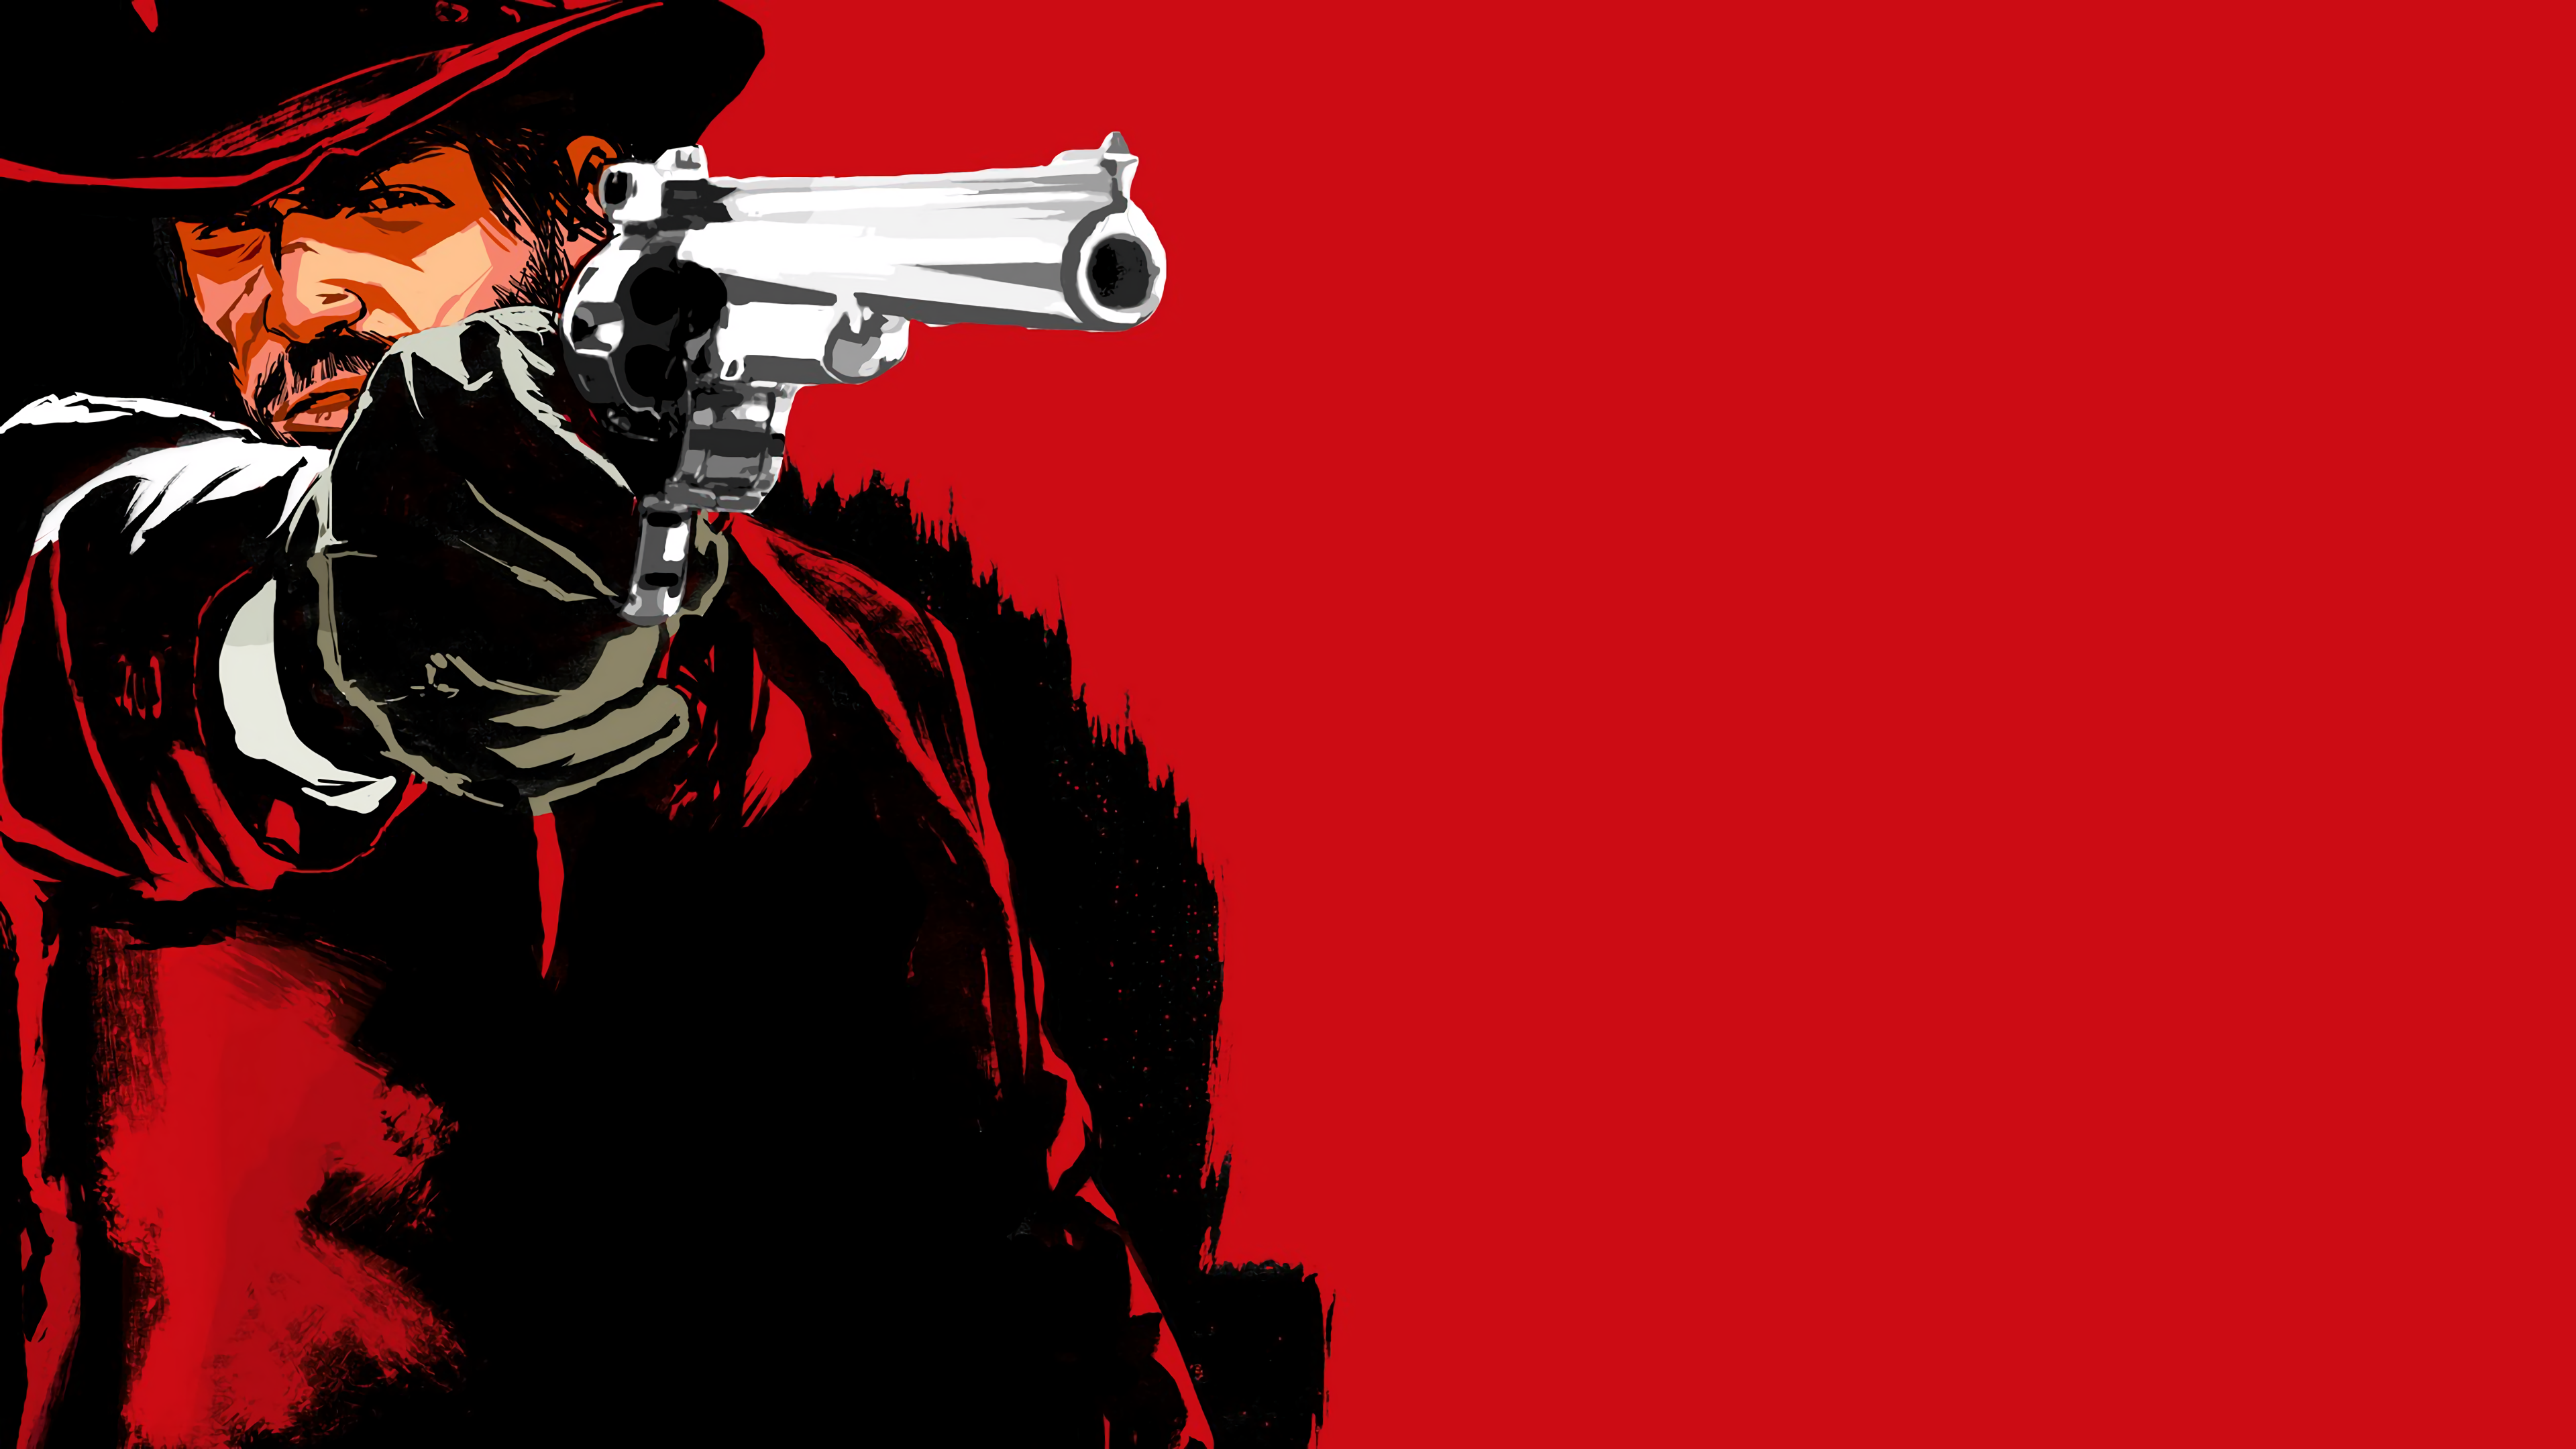 General 3840x2160 Red Dead Redemption John Marston revolver Video Game Heroes red background video game art red video games PC gaming aiming simple background video game men video game characters